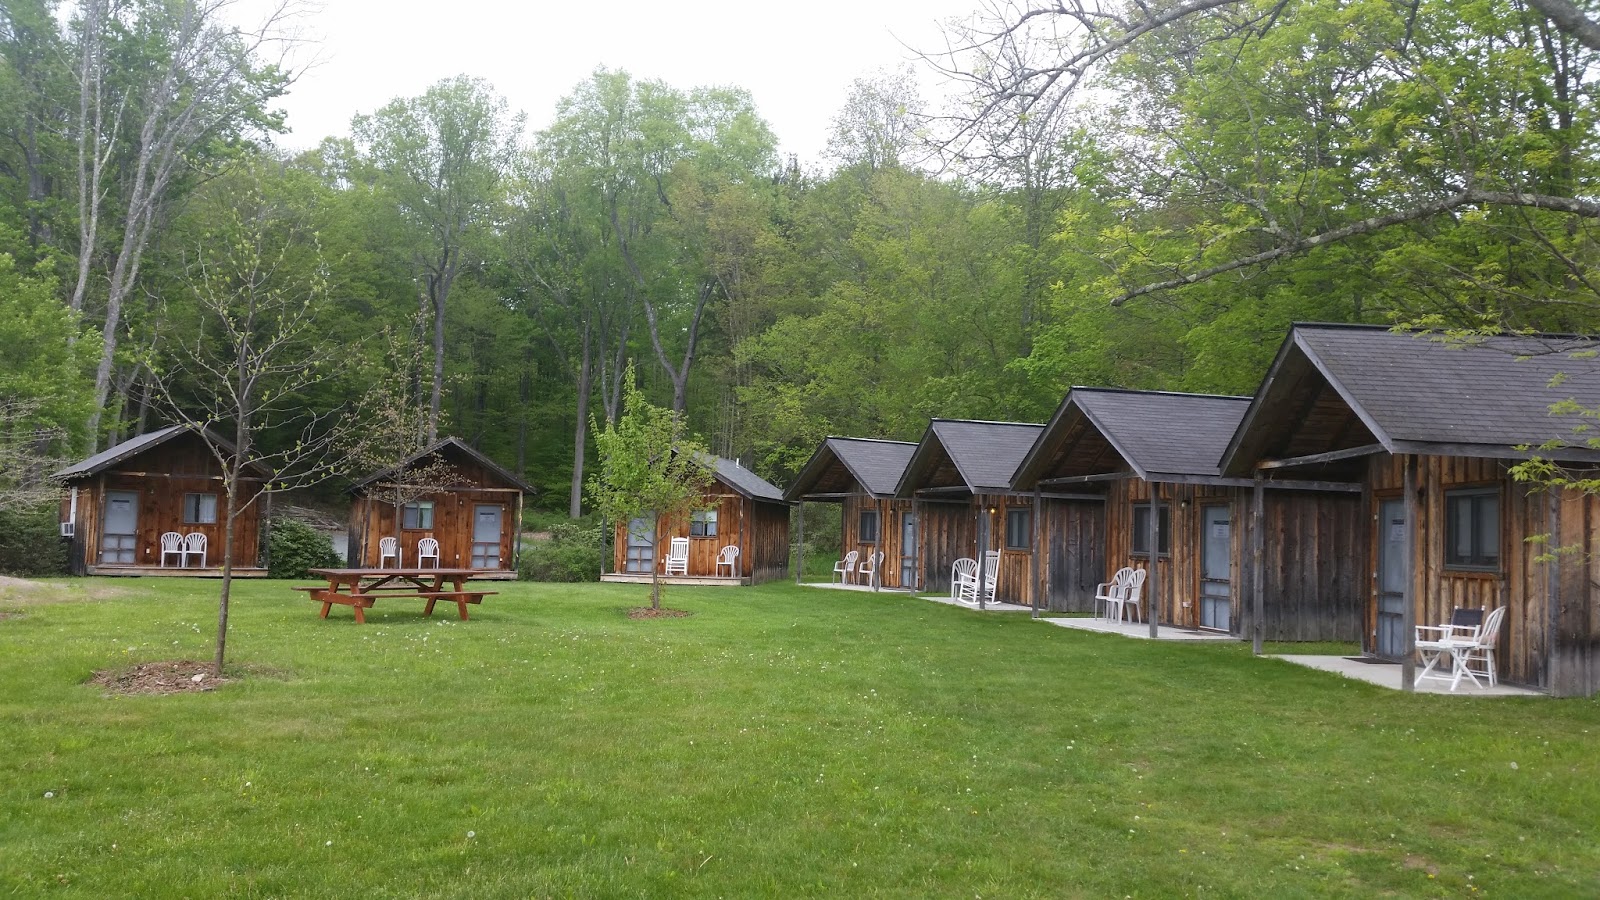 Cabins on campus